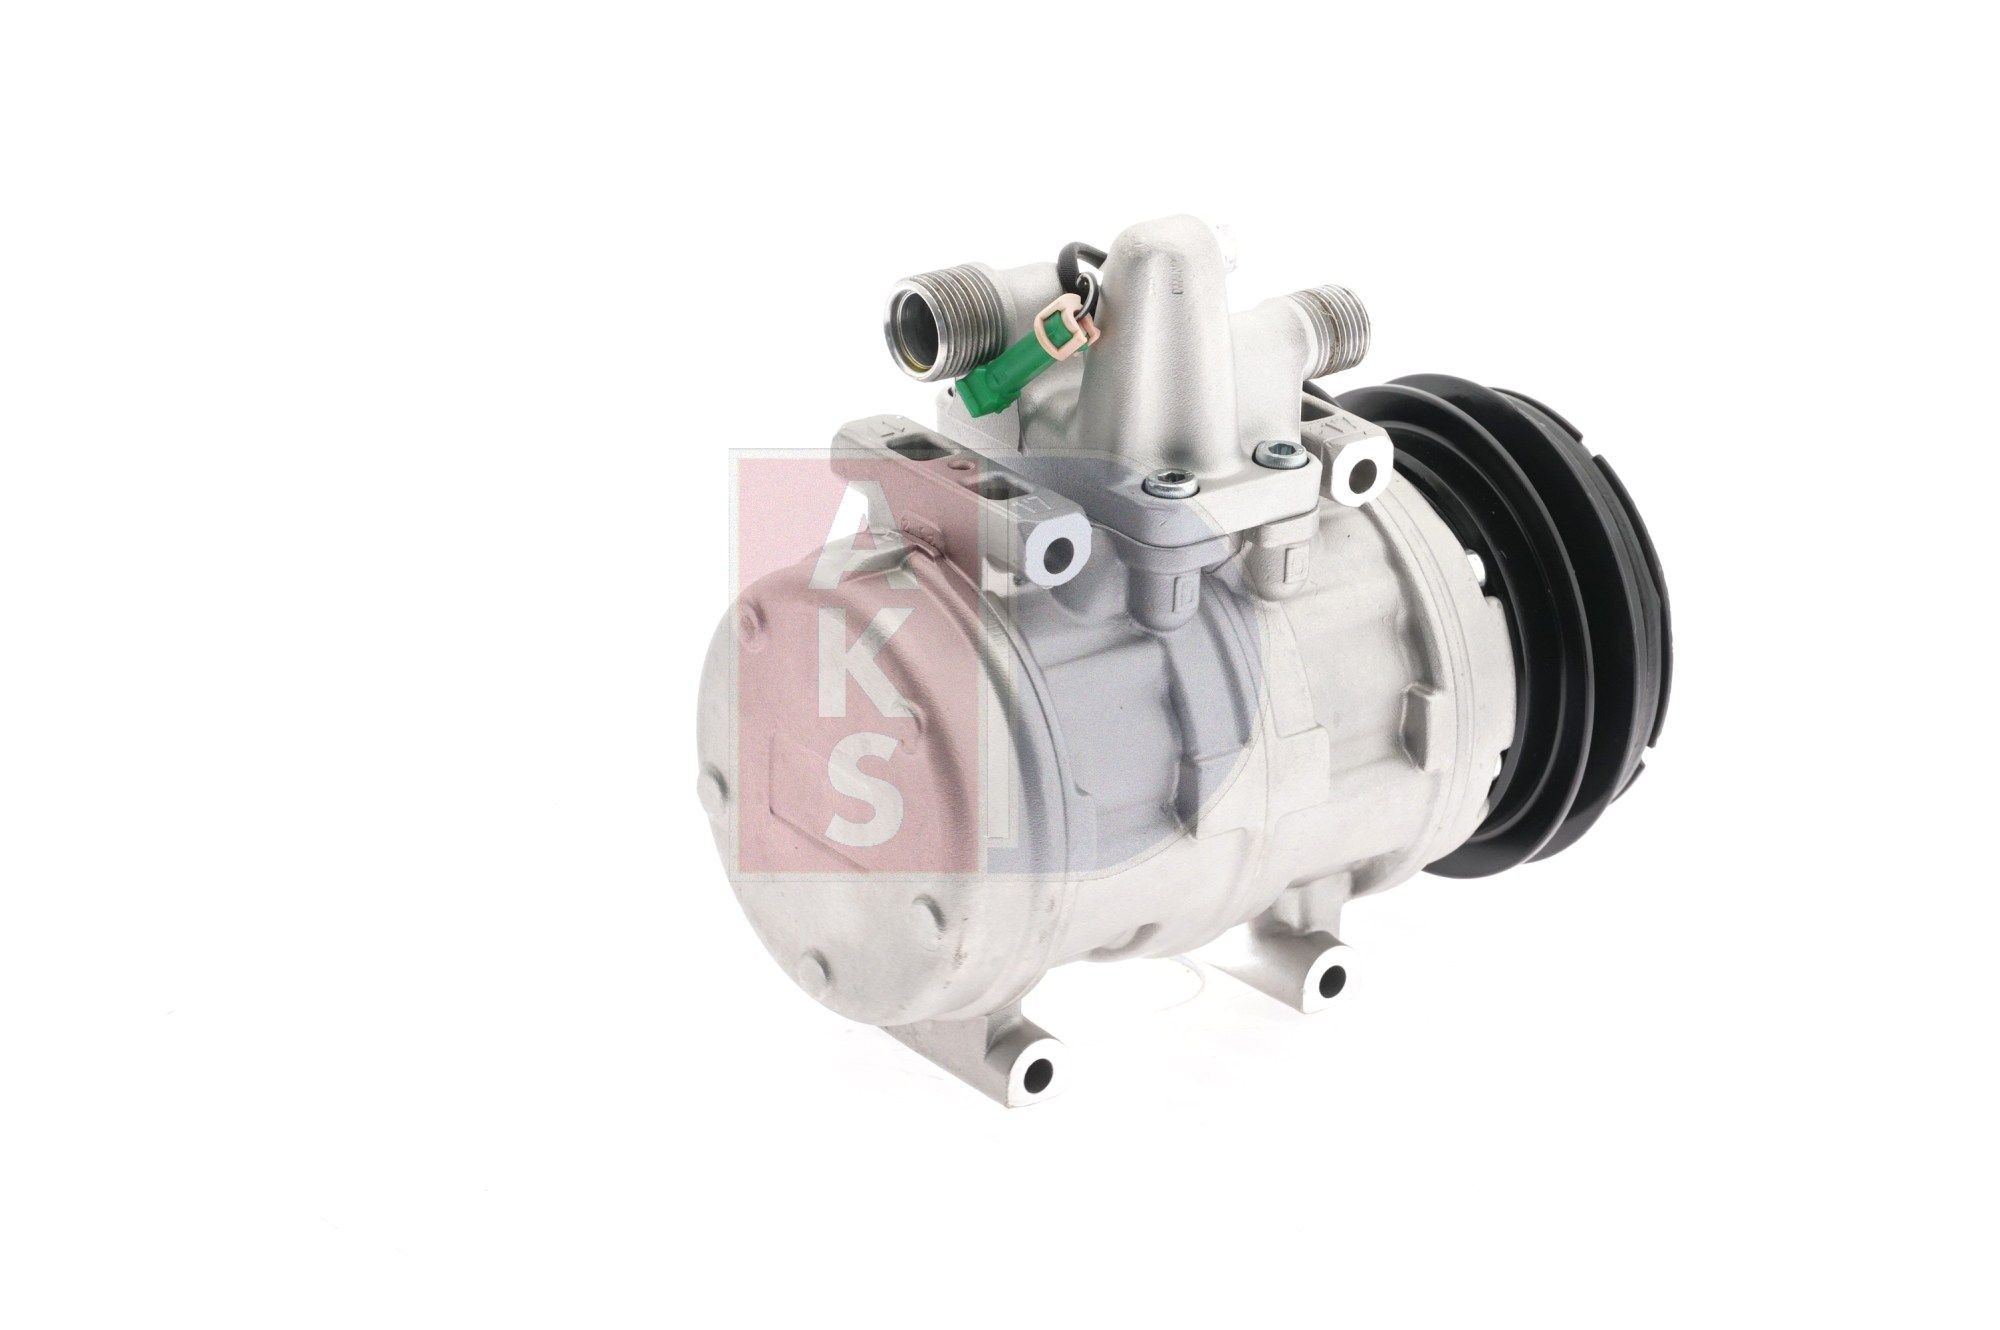 Air conditioning compressor 850890N from AKS DASIS